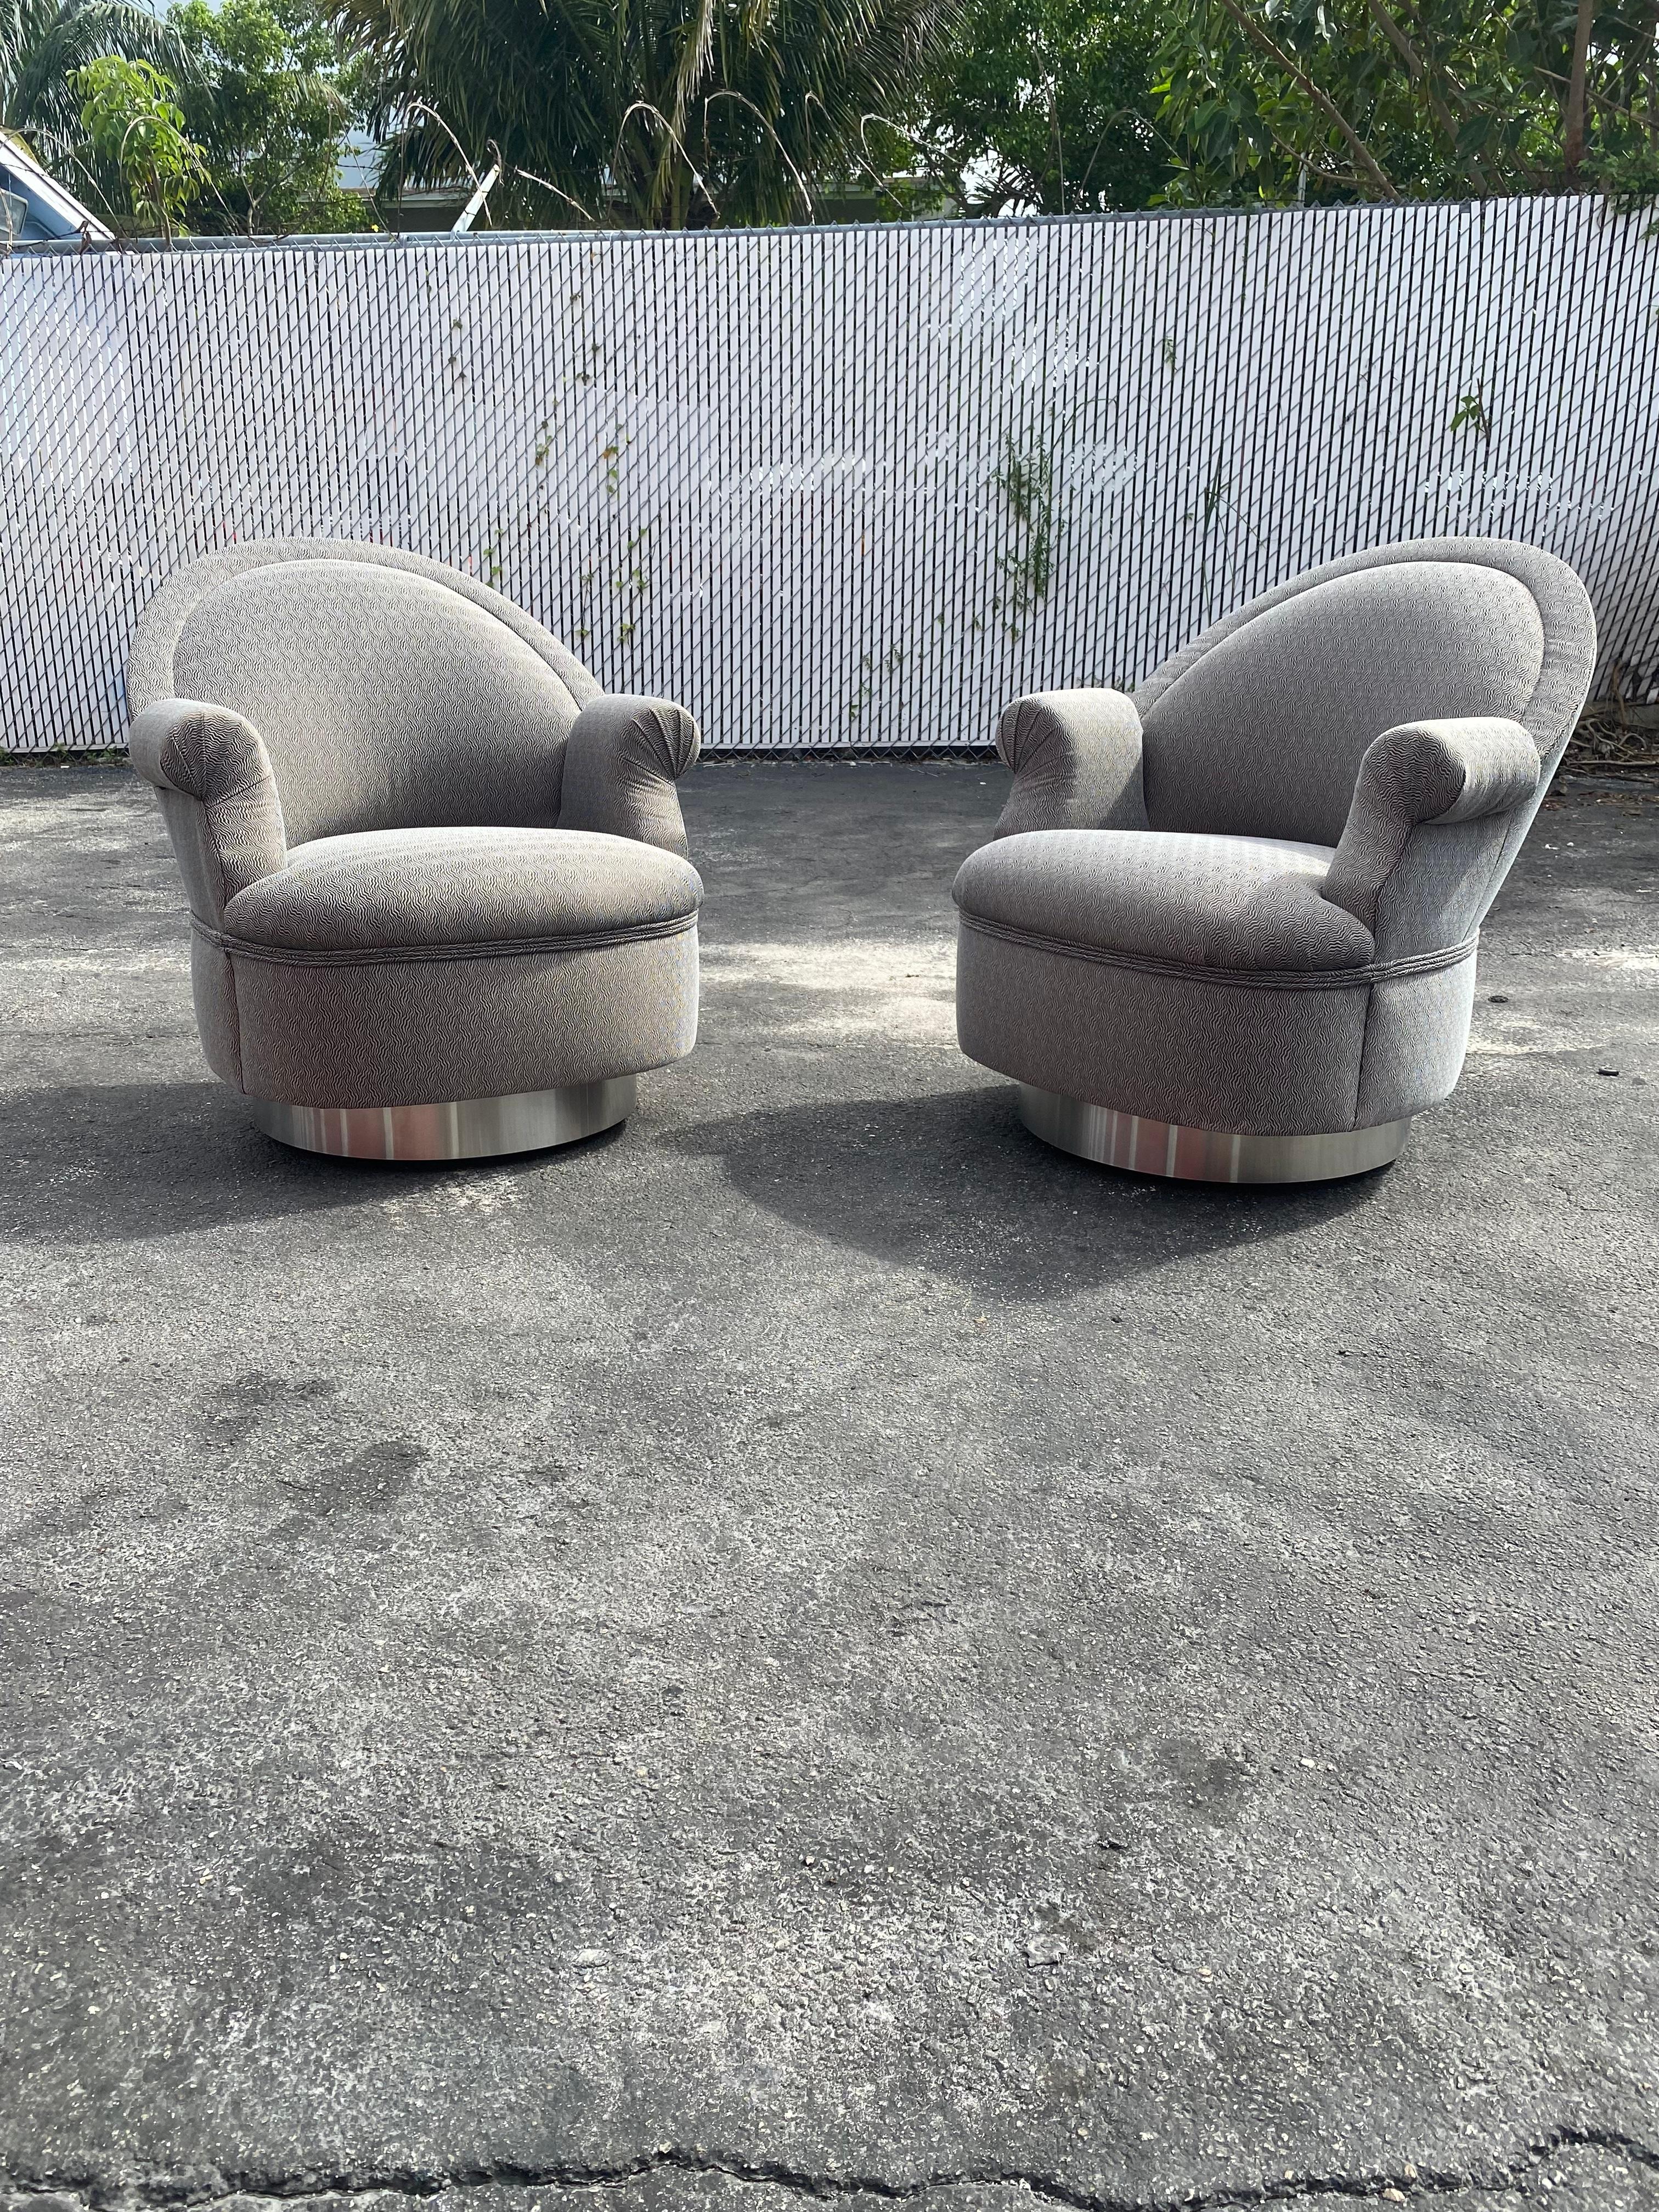 On offer on this occasion is one of the most stunning, swivel chairs you could hope to find. This is an ultra-rare opportunity to acquire what is, unequivocally, the best of the best, it being a most spectacular and beautifully-presented chairs.